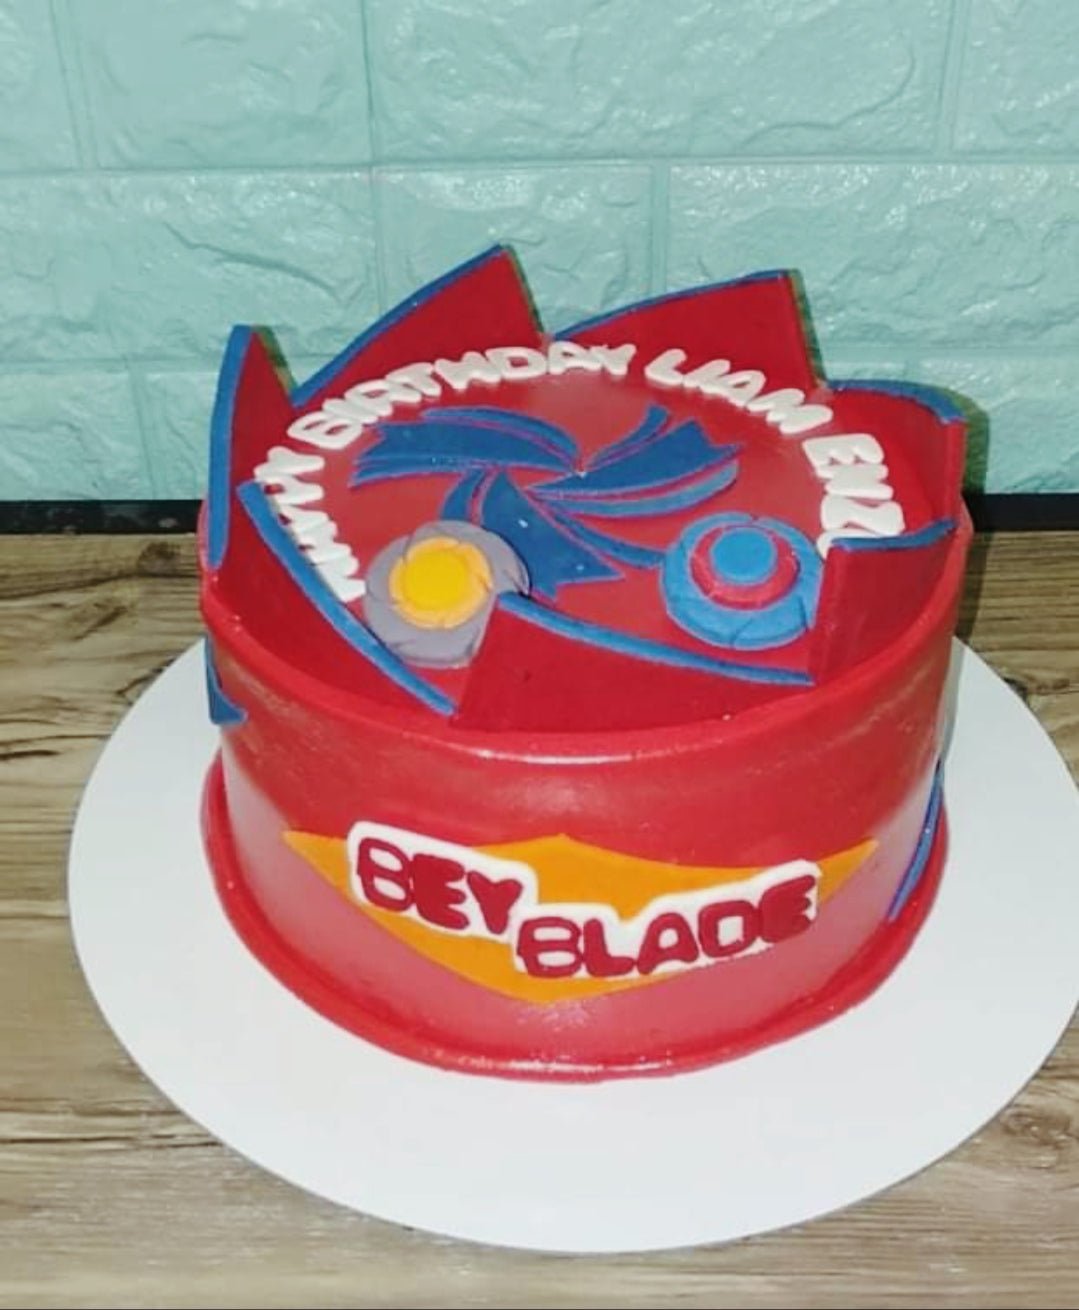 Beyblade Cake for Marion made by @littlebakersweets Happy Birthday to you  Marion! ‐-------------------❤❤❤‐------------------- Call… | Instagram